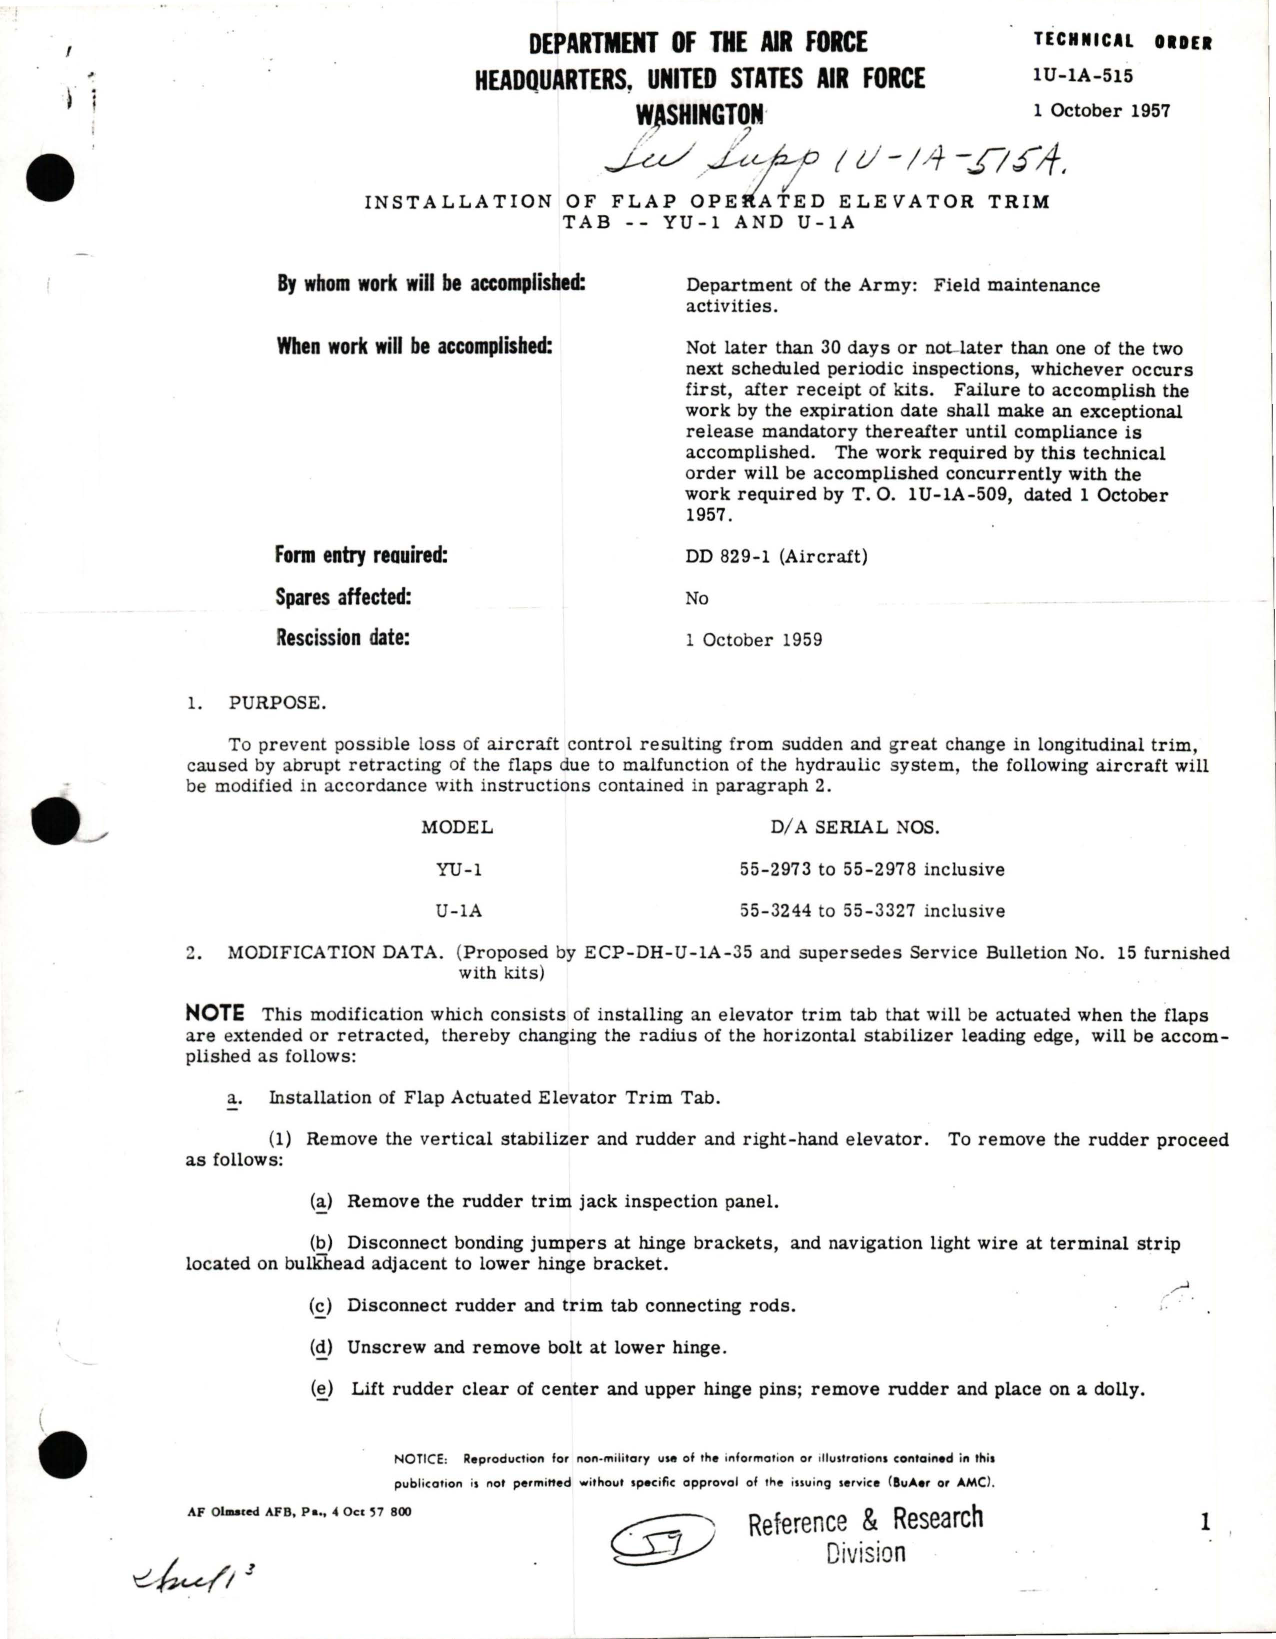 Sample page 1 from AirCorps Library document: Installation of Flap Operated Elevator Trim Tab on YU-1 and U-1A